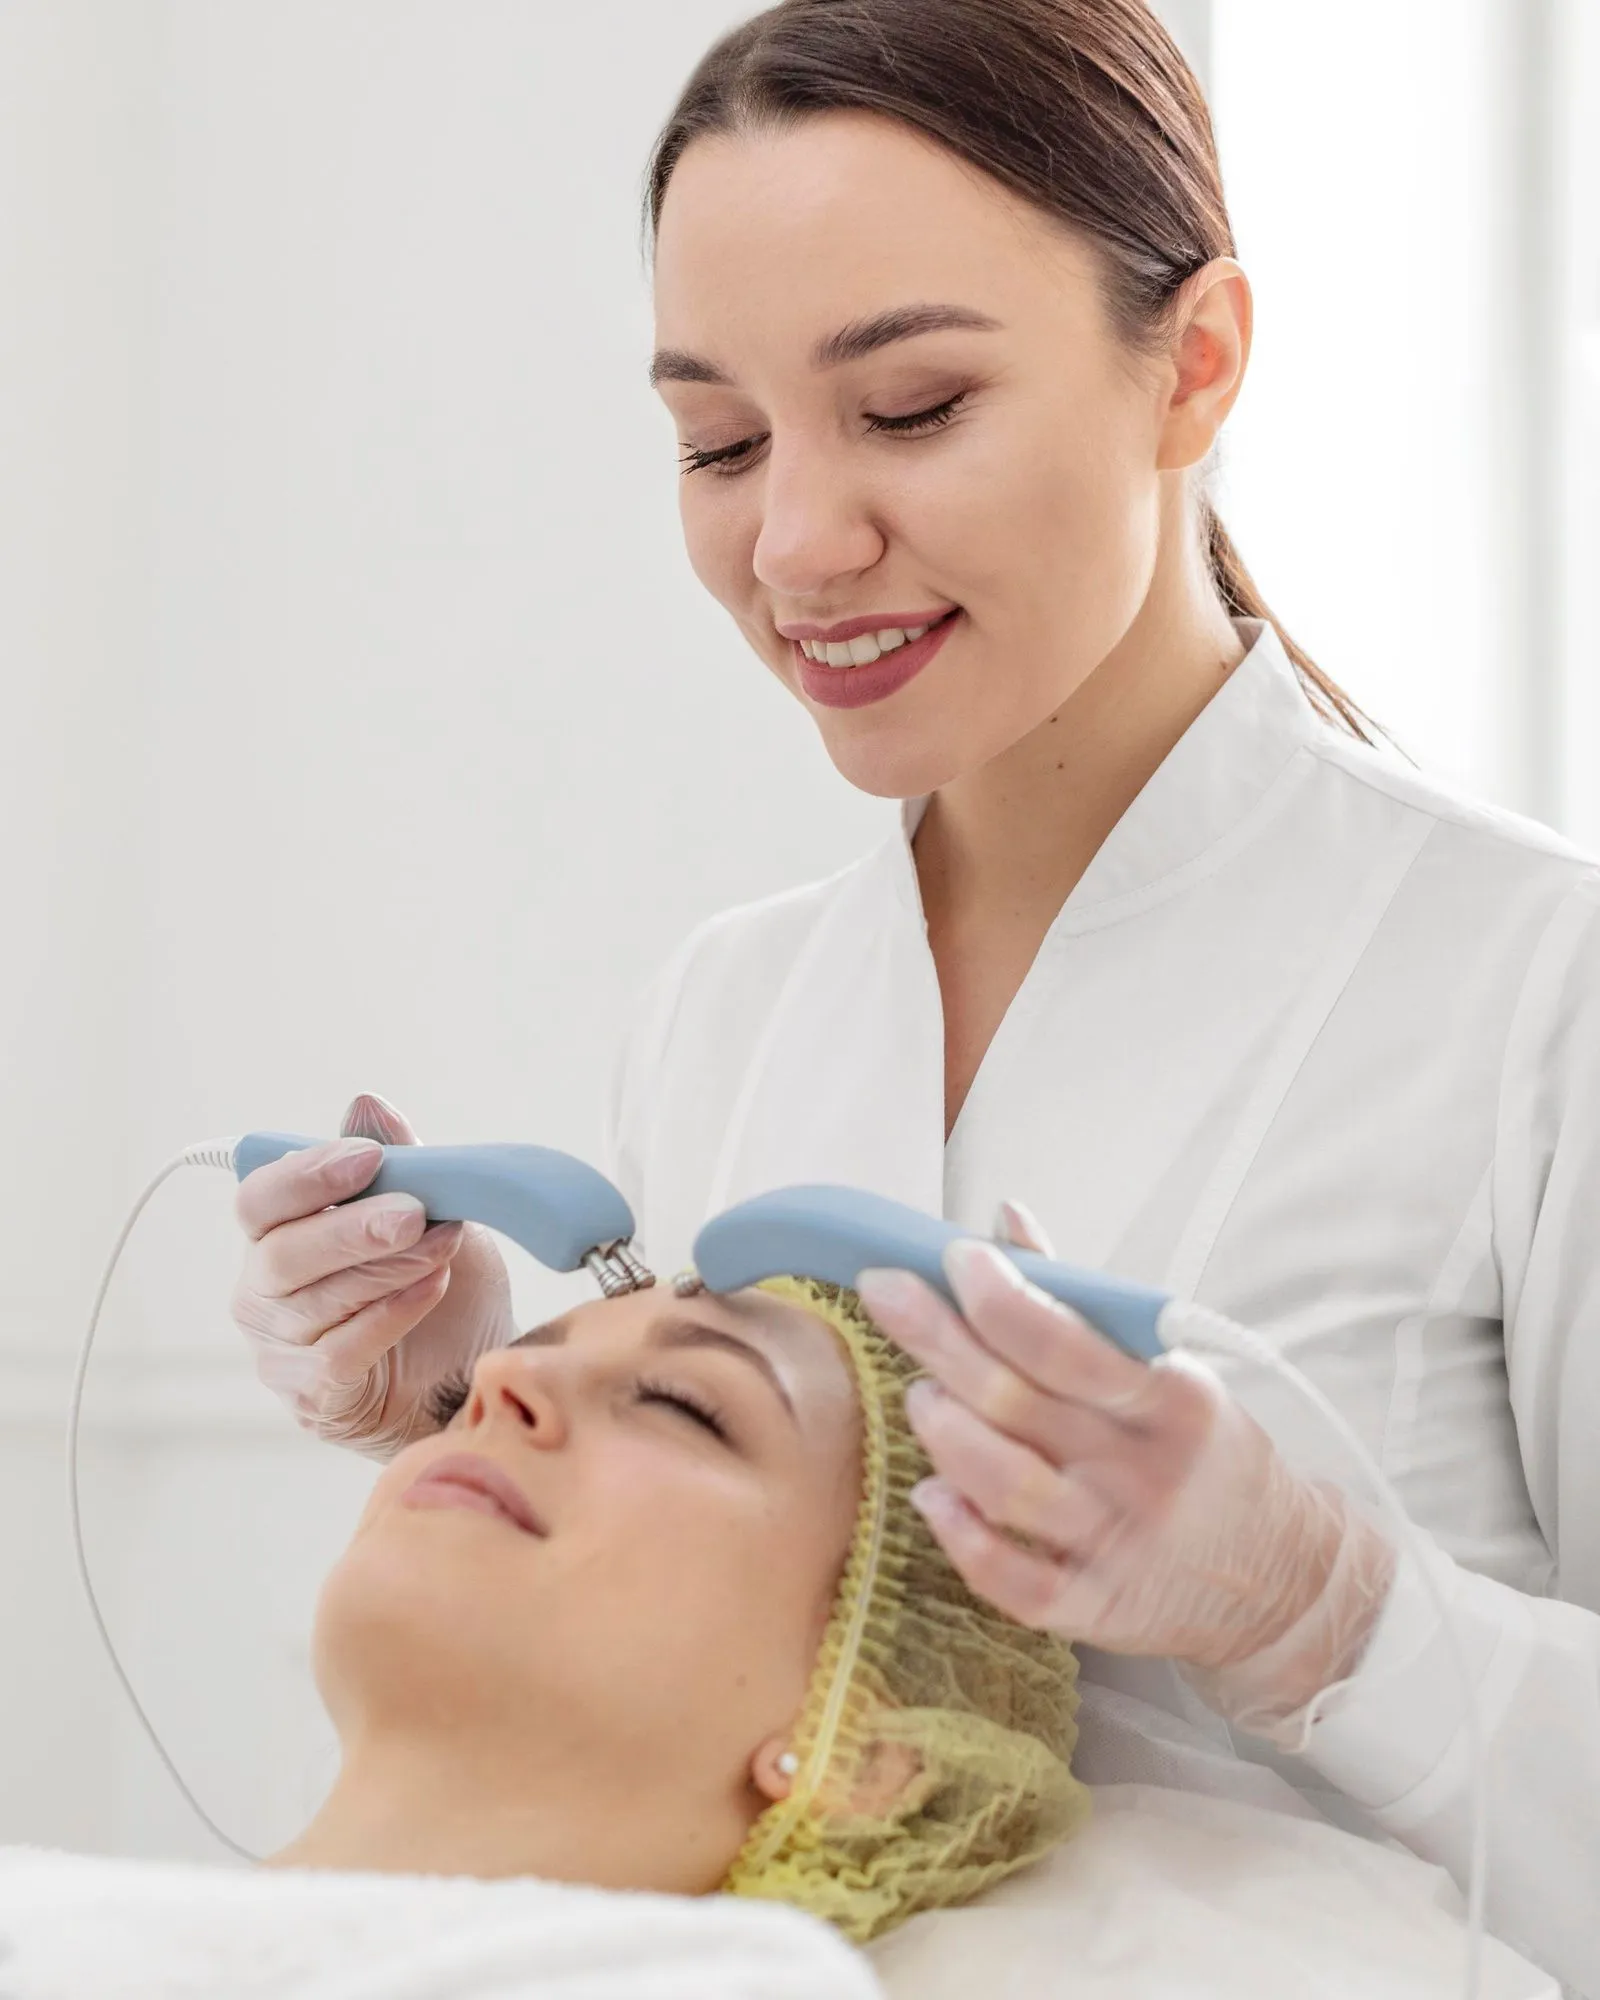 Dermapen Vs Traditional Micro-Needling; Which Is Right For You